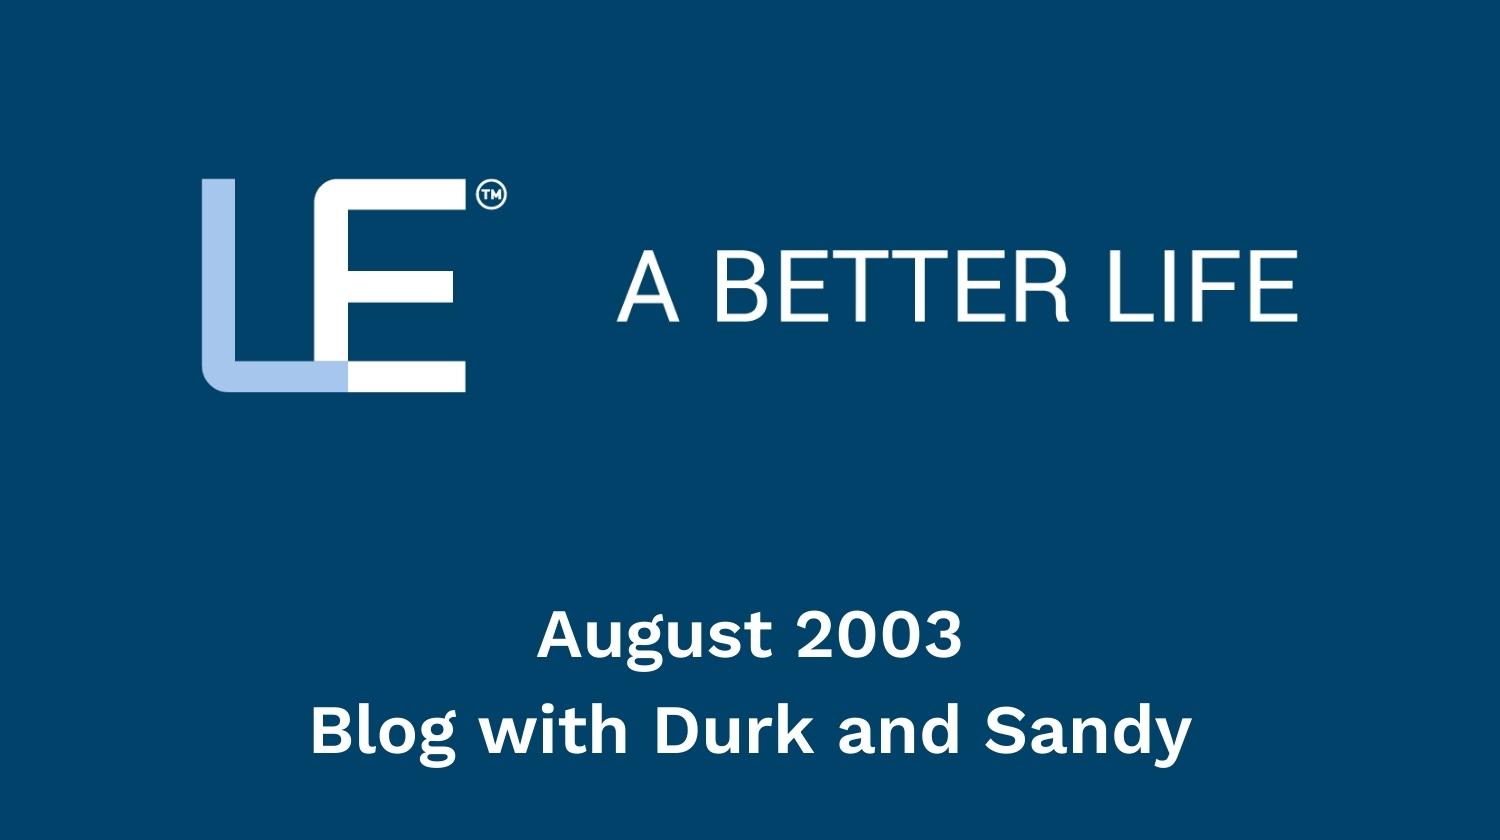 August 2003 Blog with Durk and Sandy